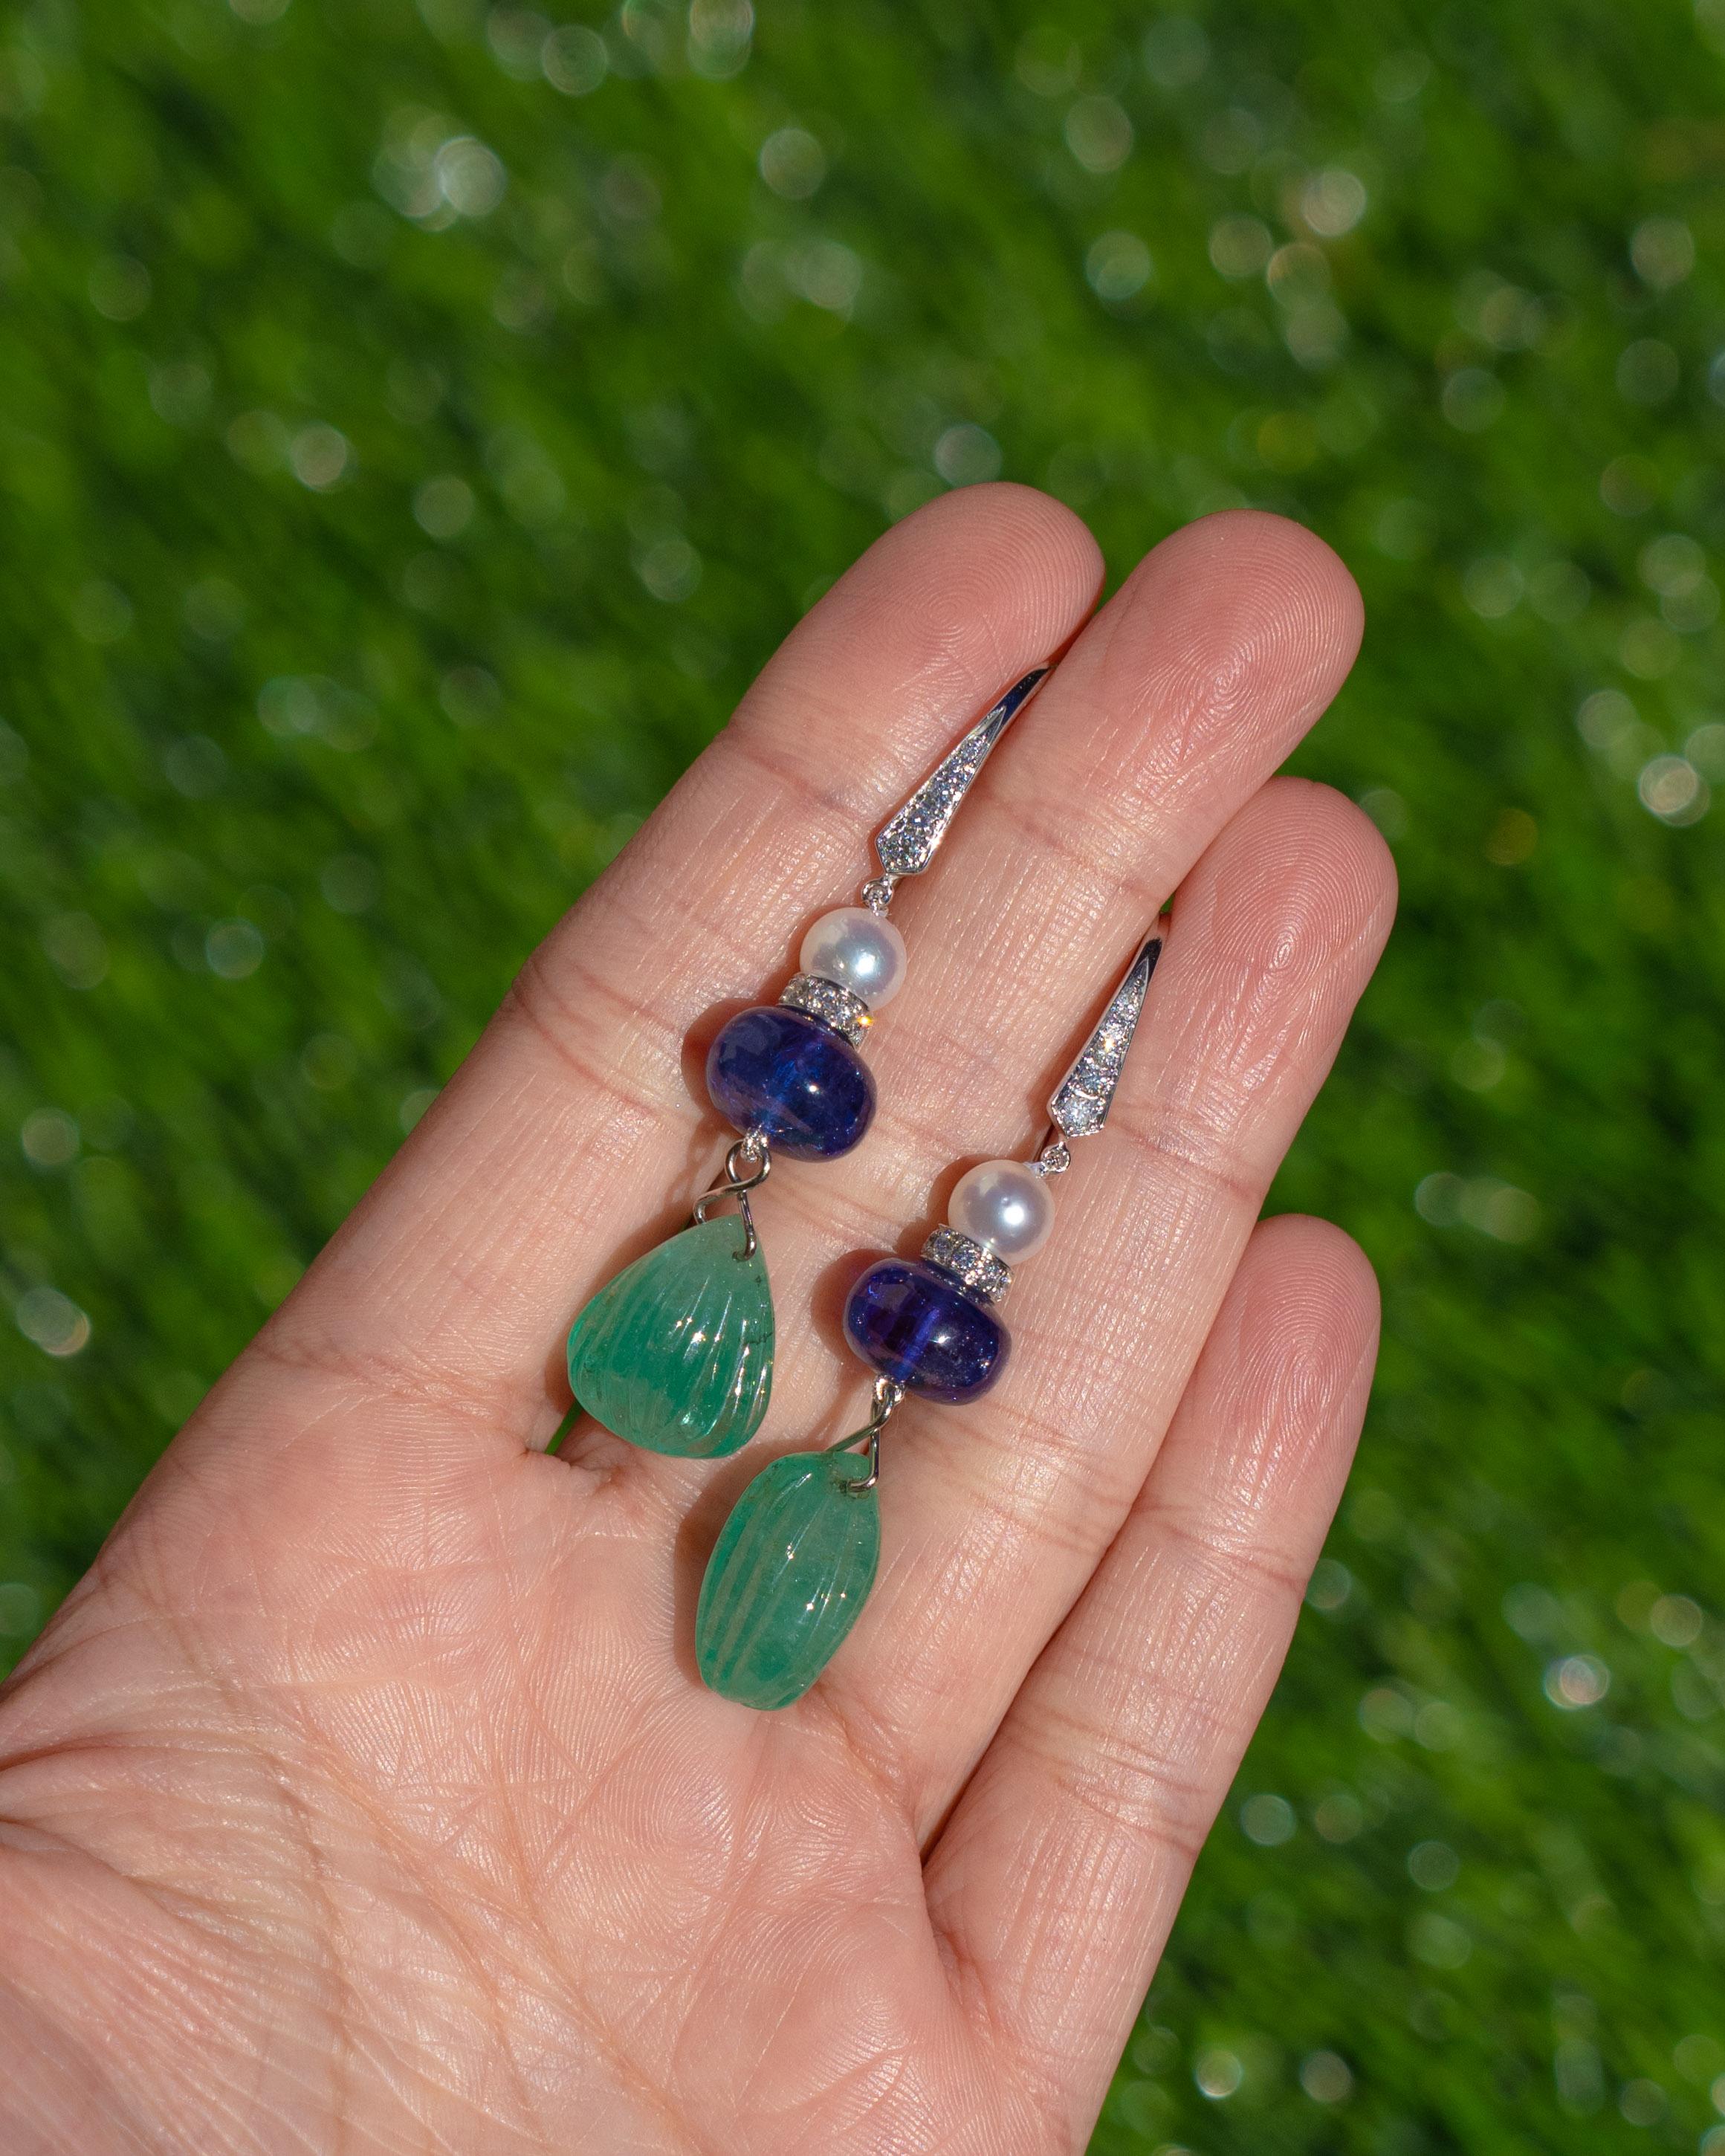 A very beautiful and one of a kind, emerald drop dangle earrings set in 18K White Gold & Diamonds. The weight of the Colombian Emerald Carvings is 25.30 carats. The Emeralds are completely natural, without any treatment and are of Colombian origin.